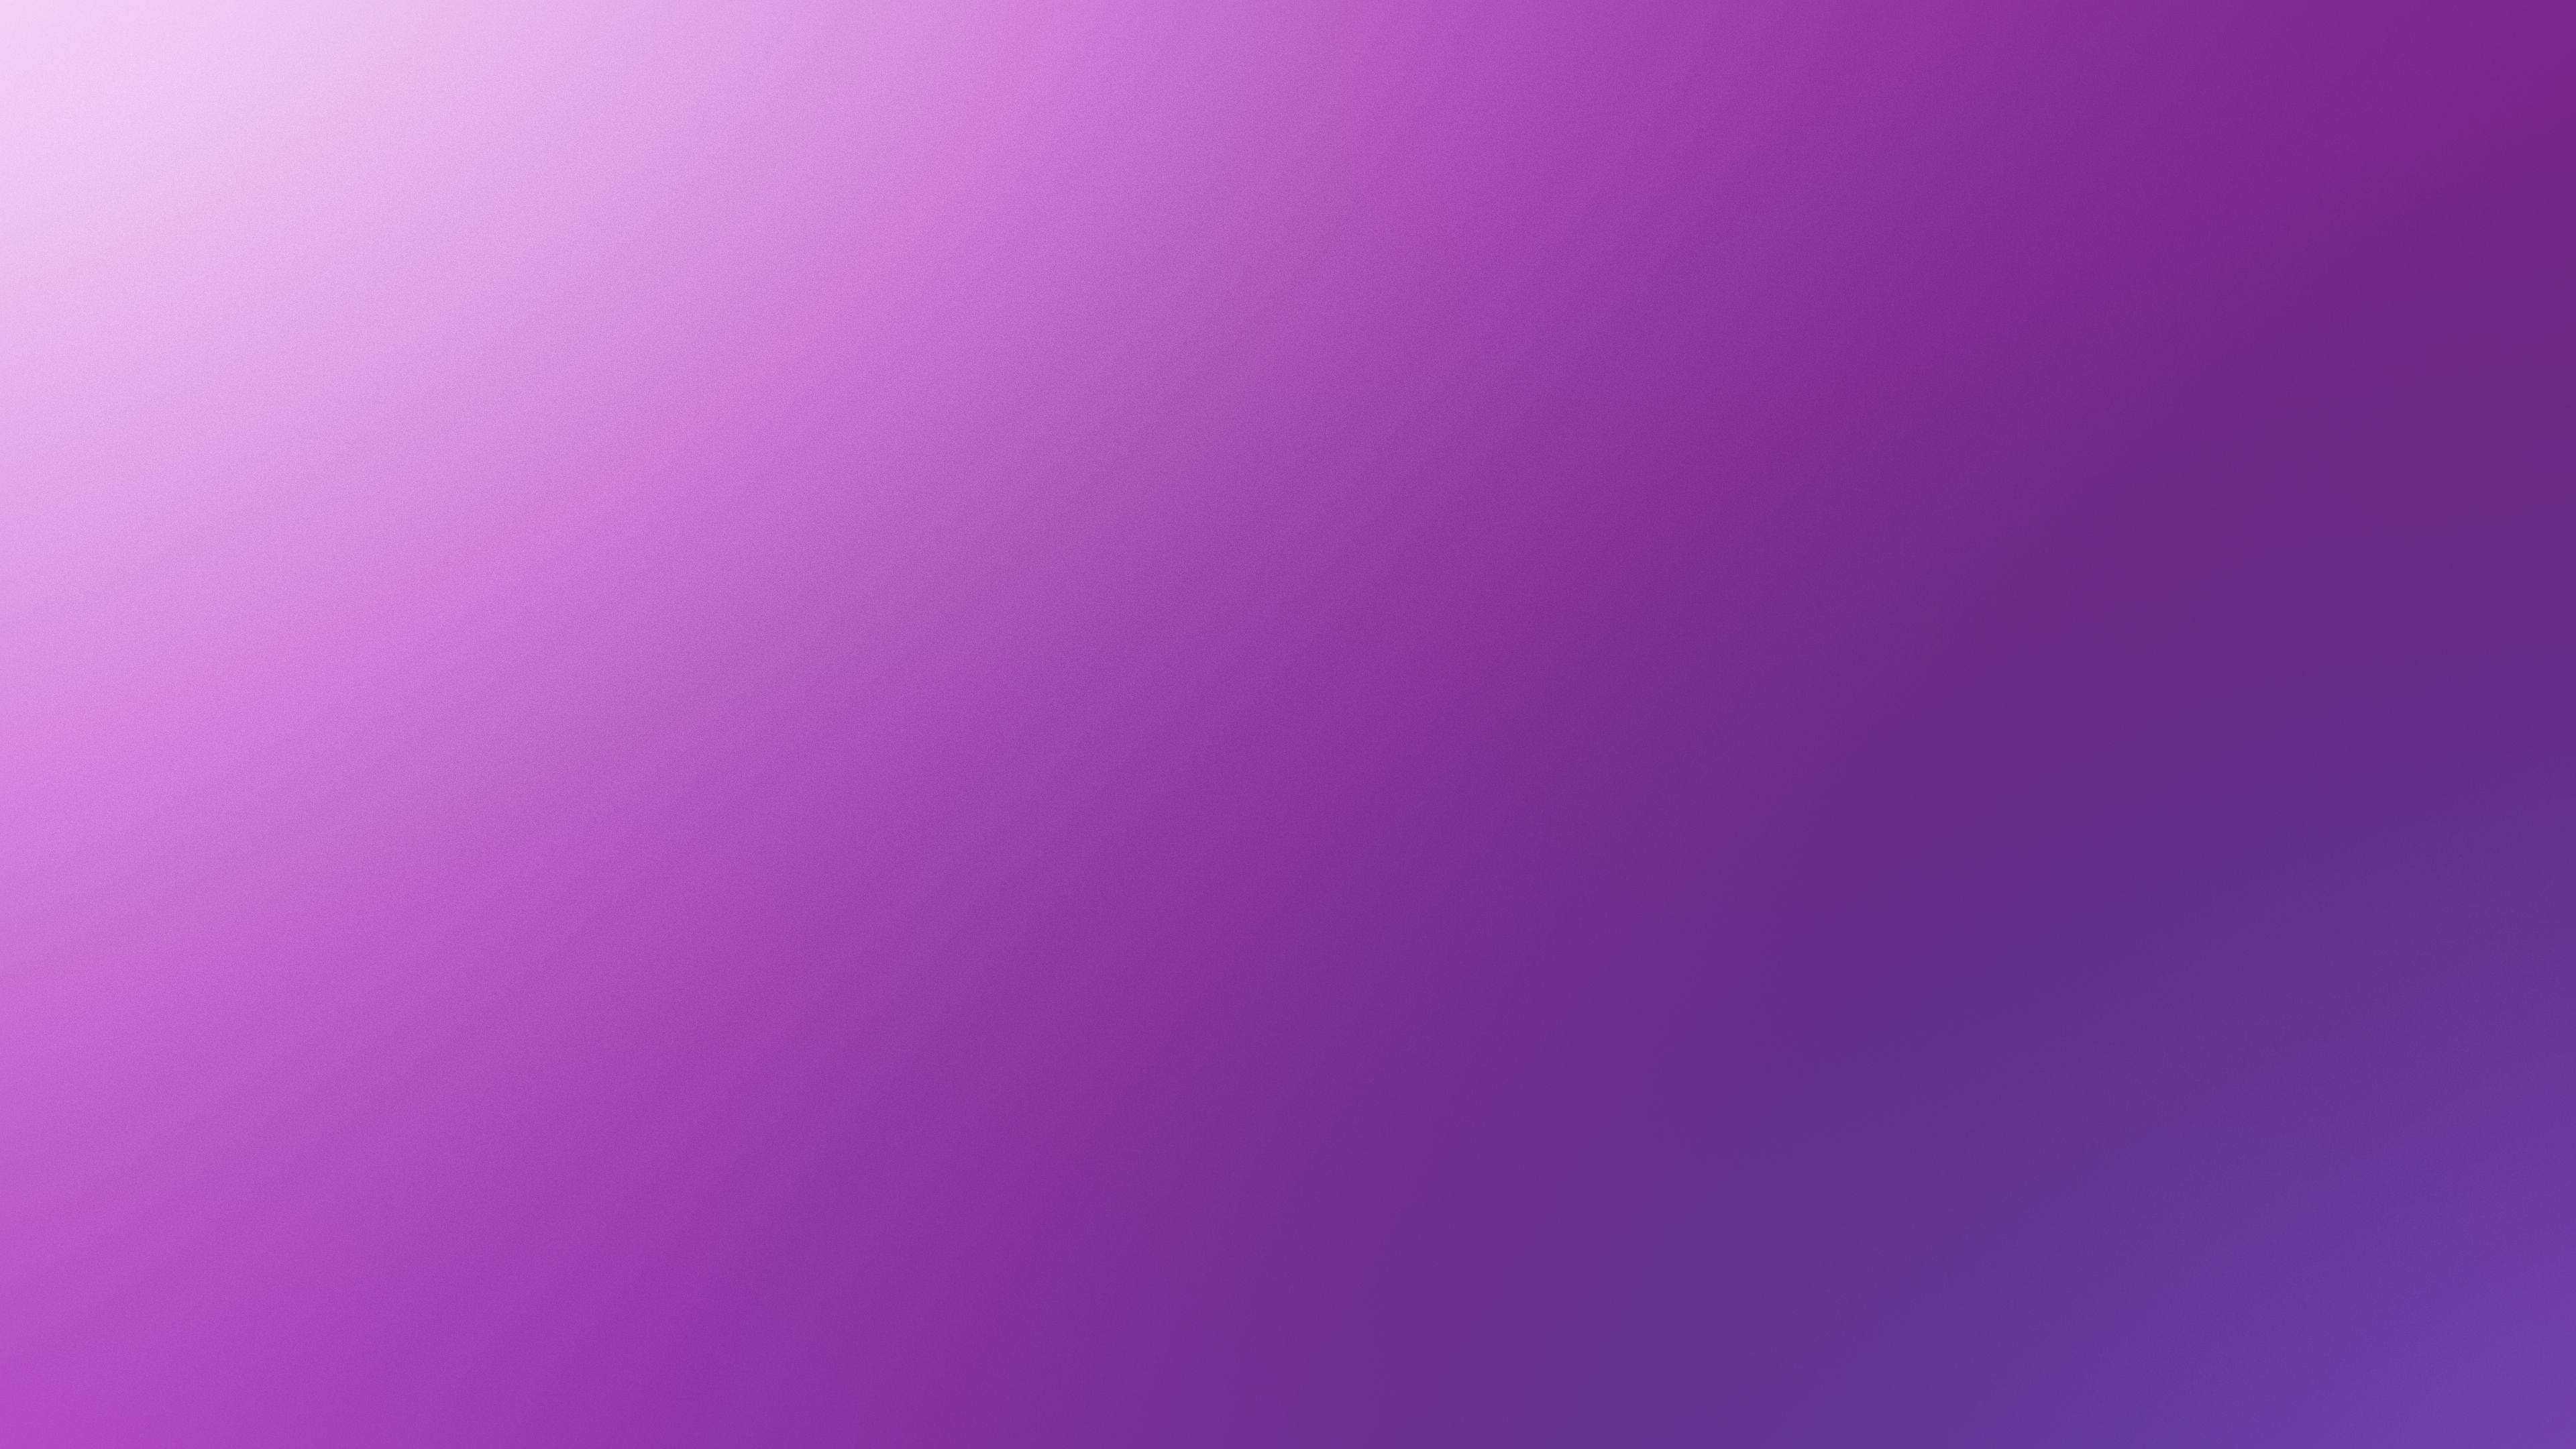 Space Purple Light Blur Minimalism 4k, HD Artist, 4k Wallpaper, Image, Background, Photo and Picture